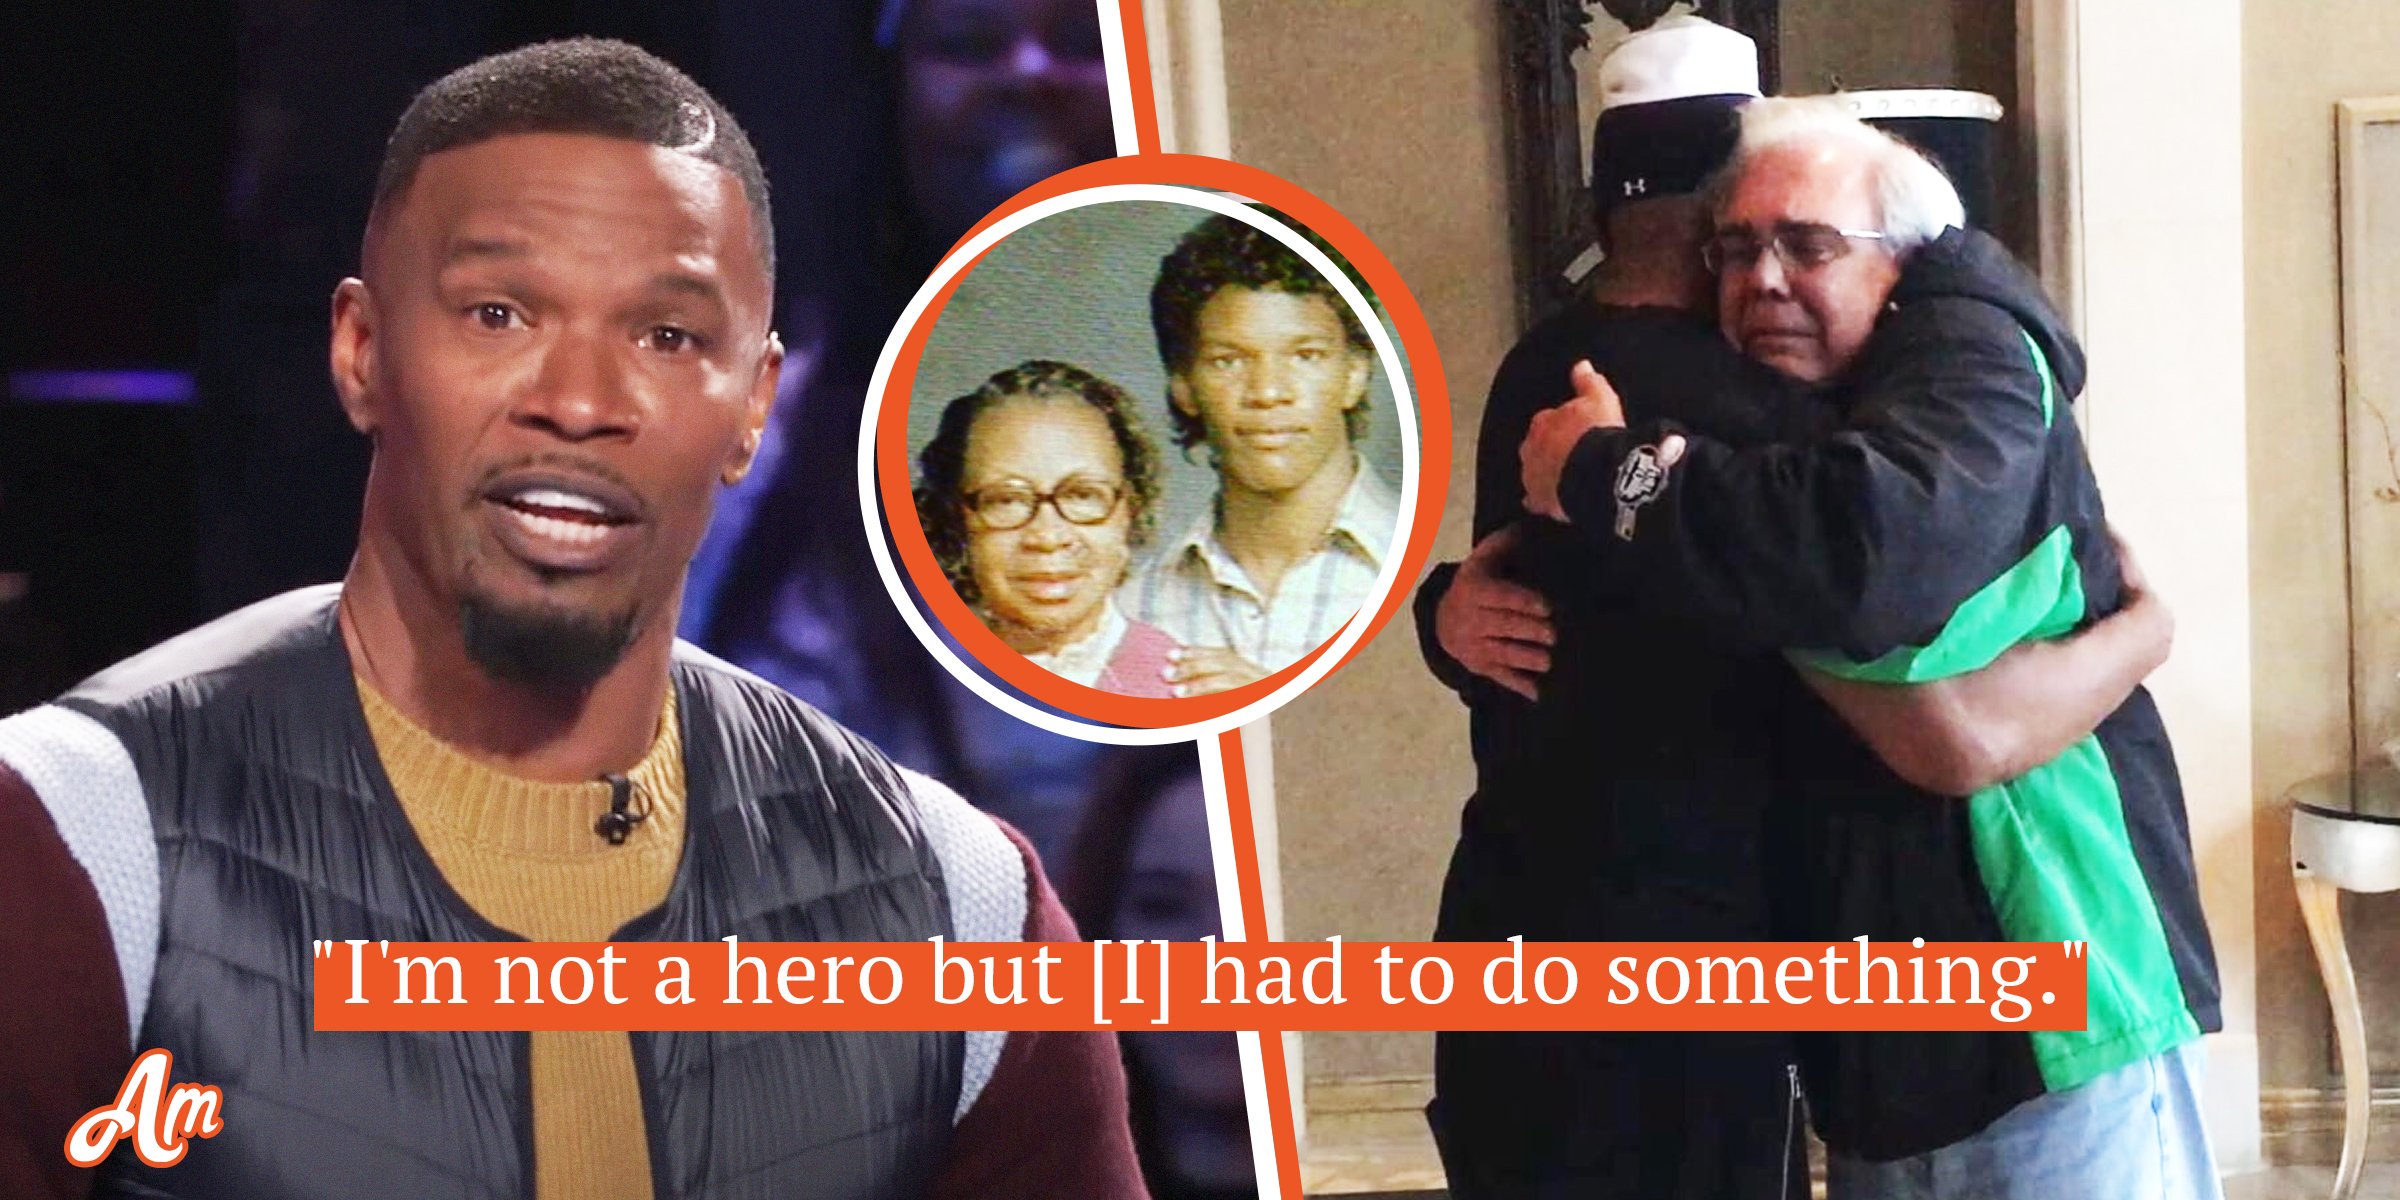 Jamie Foxx Rescued Man Out Of Burning Car — He Learned Self Sacrifice From Grandma Who Risked 